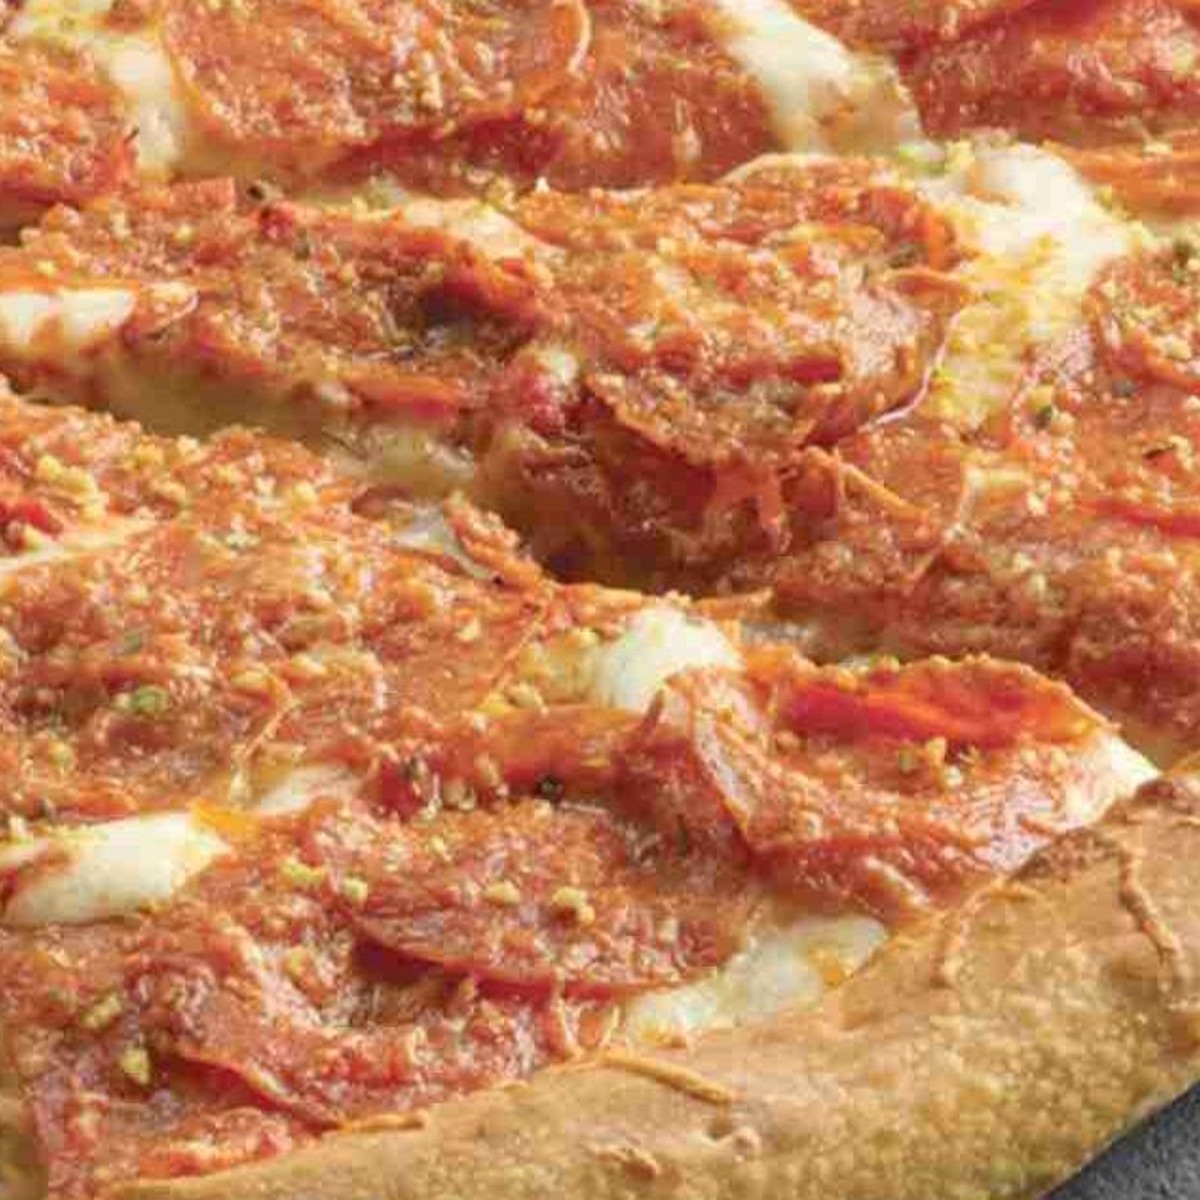 Papa Johns Delights Fans of #1 Pizza Topping With New Epic  Pepperoni-Stuffed Crust Pizza